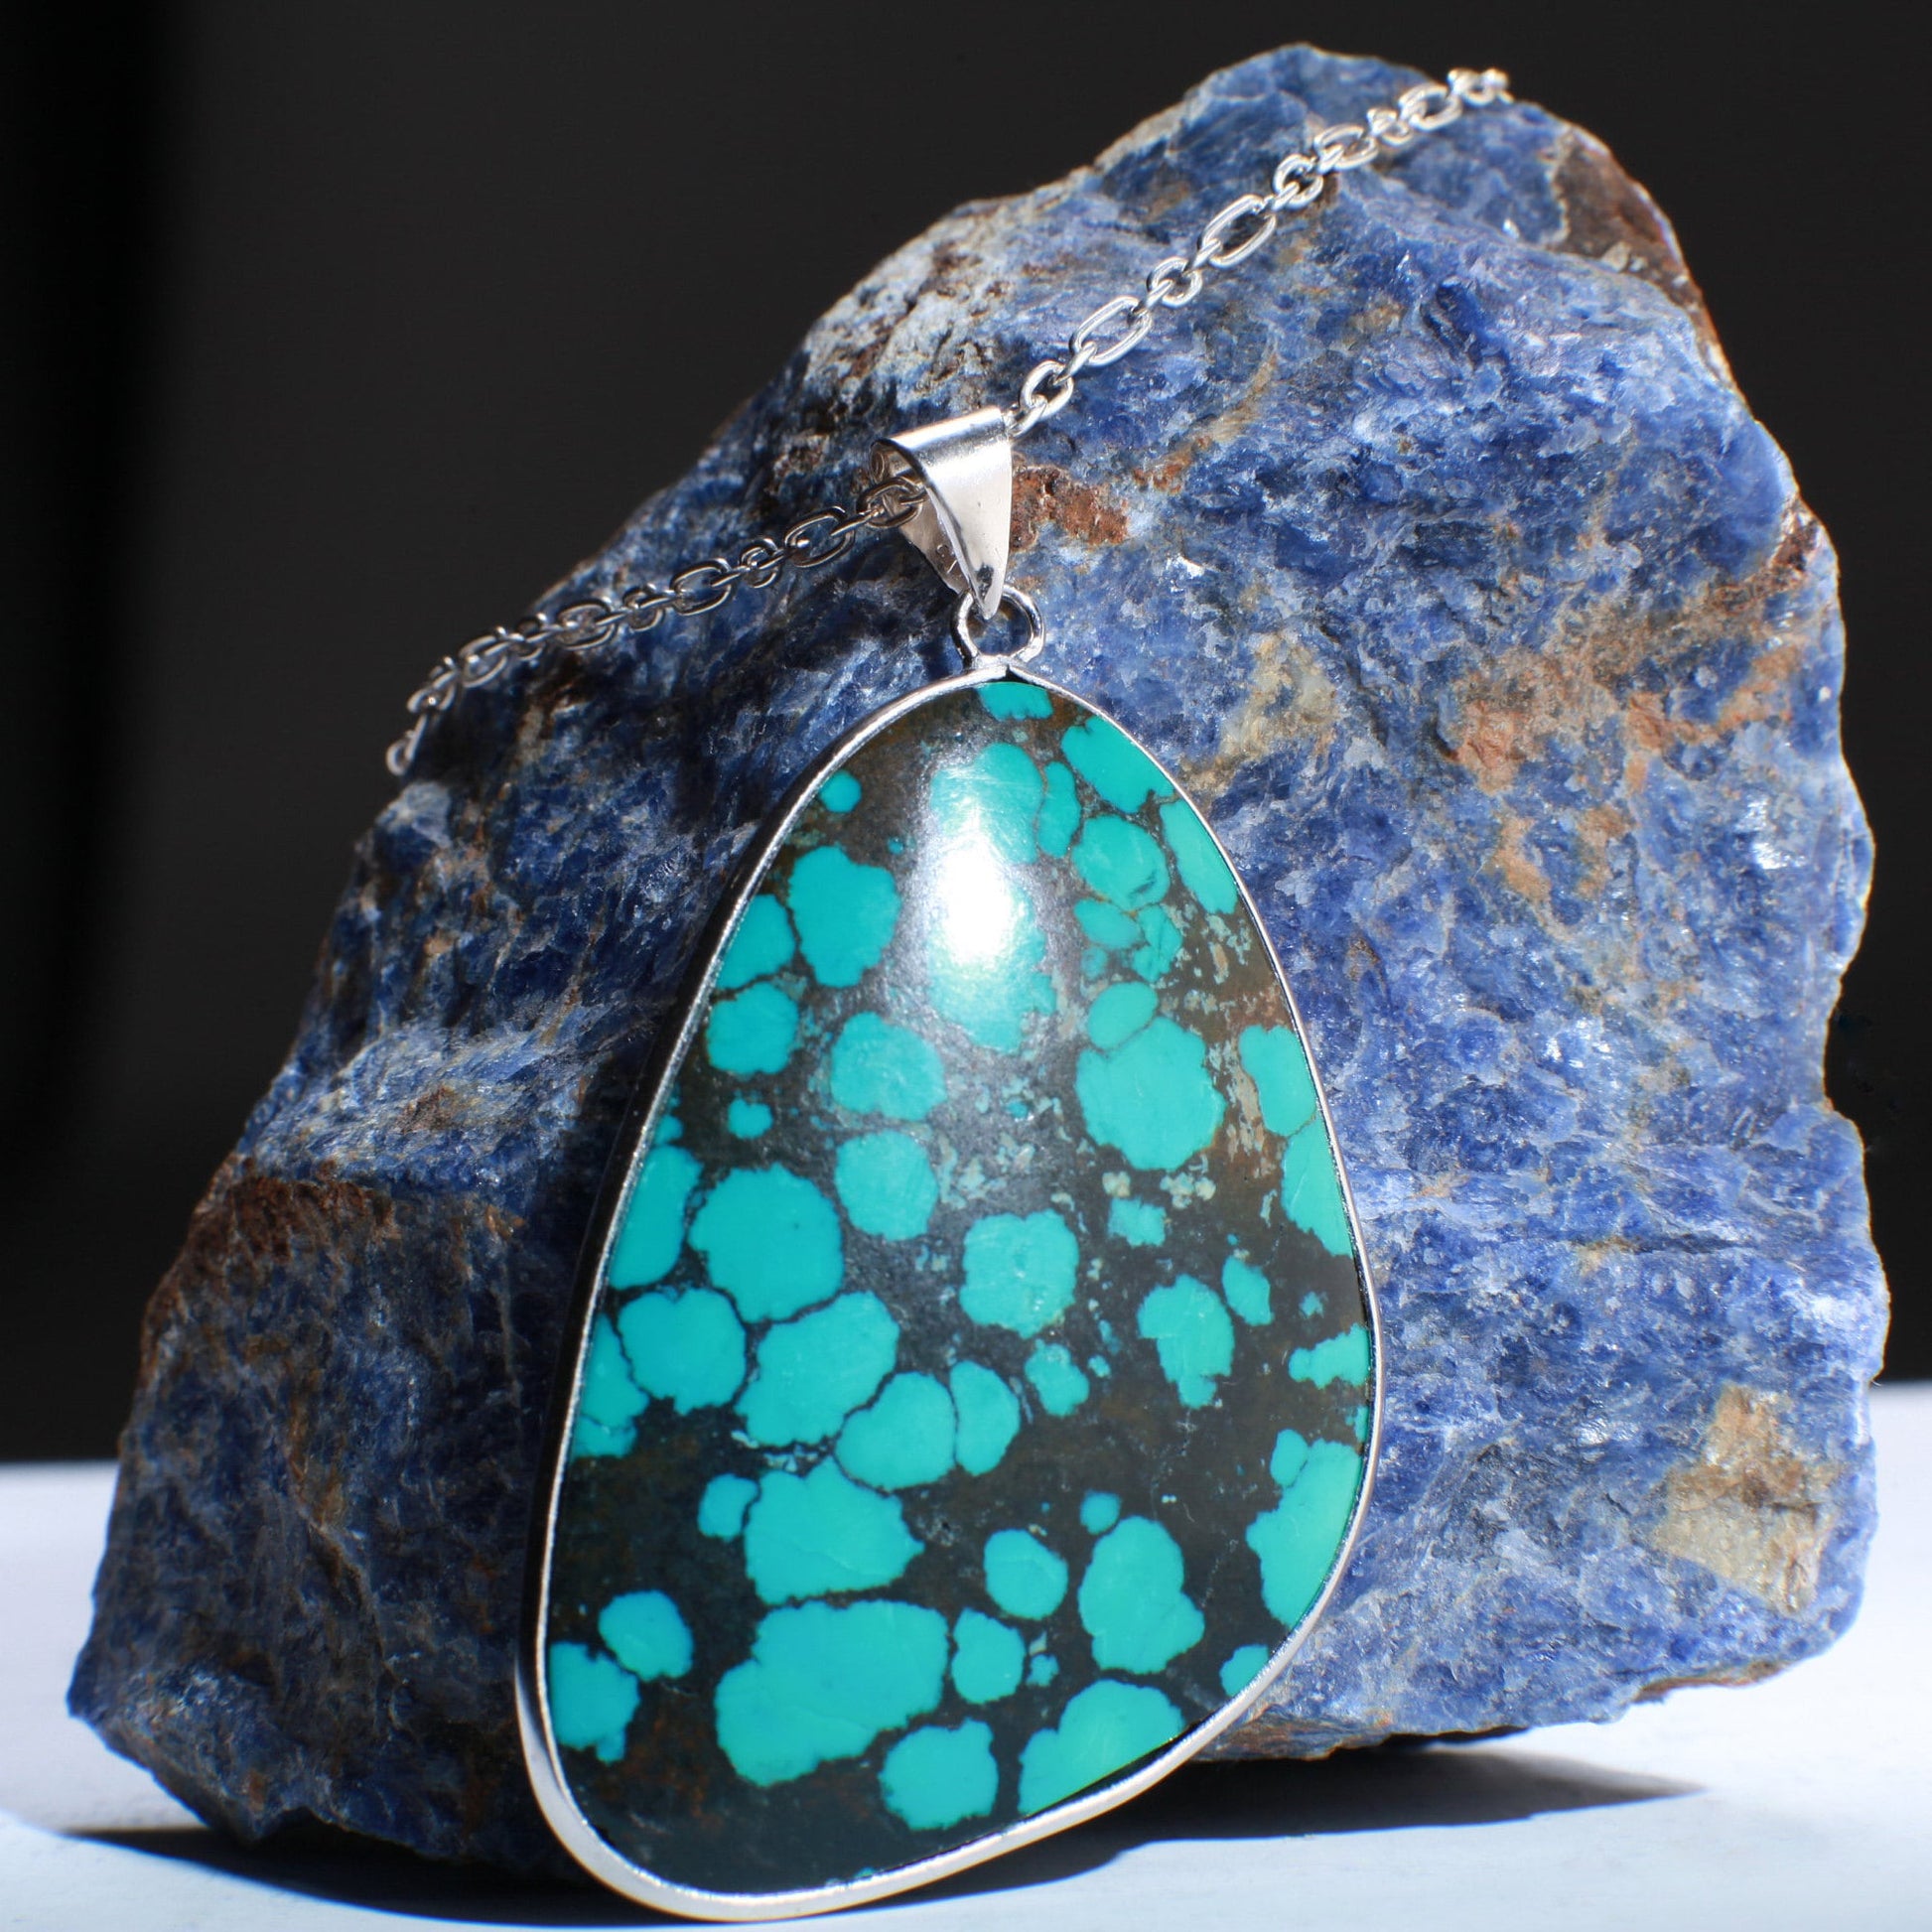 Genuine AAA Tibetan Spiderweb Turquoise Cab Gemstone 925 Sterling Silver Bezel Pendant Vintage Jewelry, Option:925 Silver Chain,38x58mm 18g